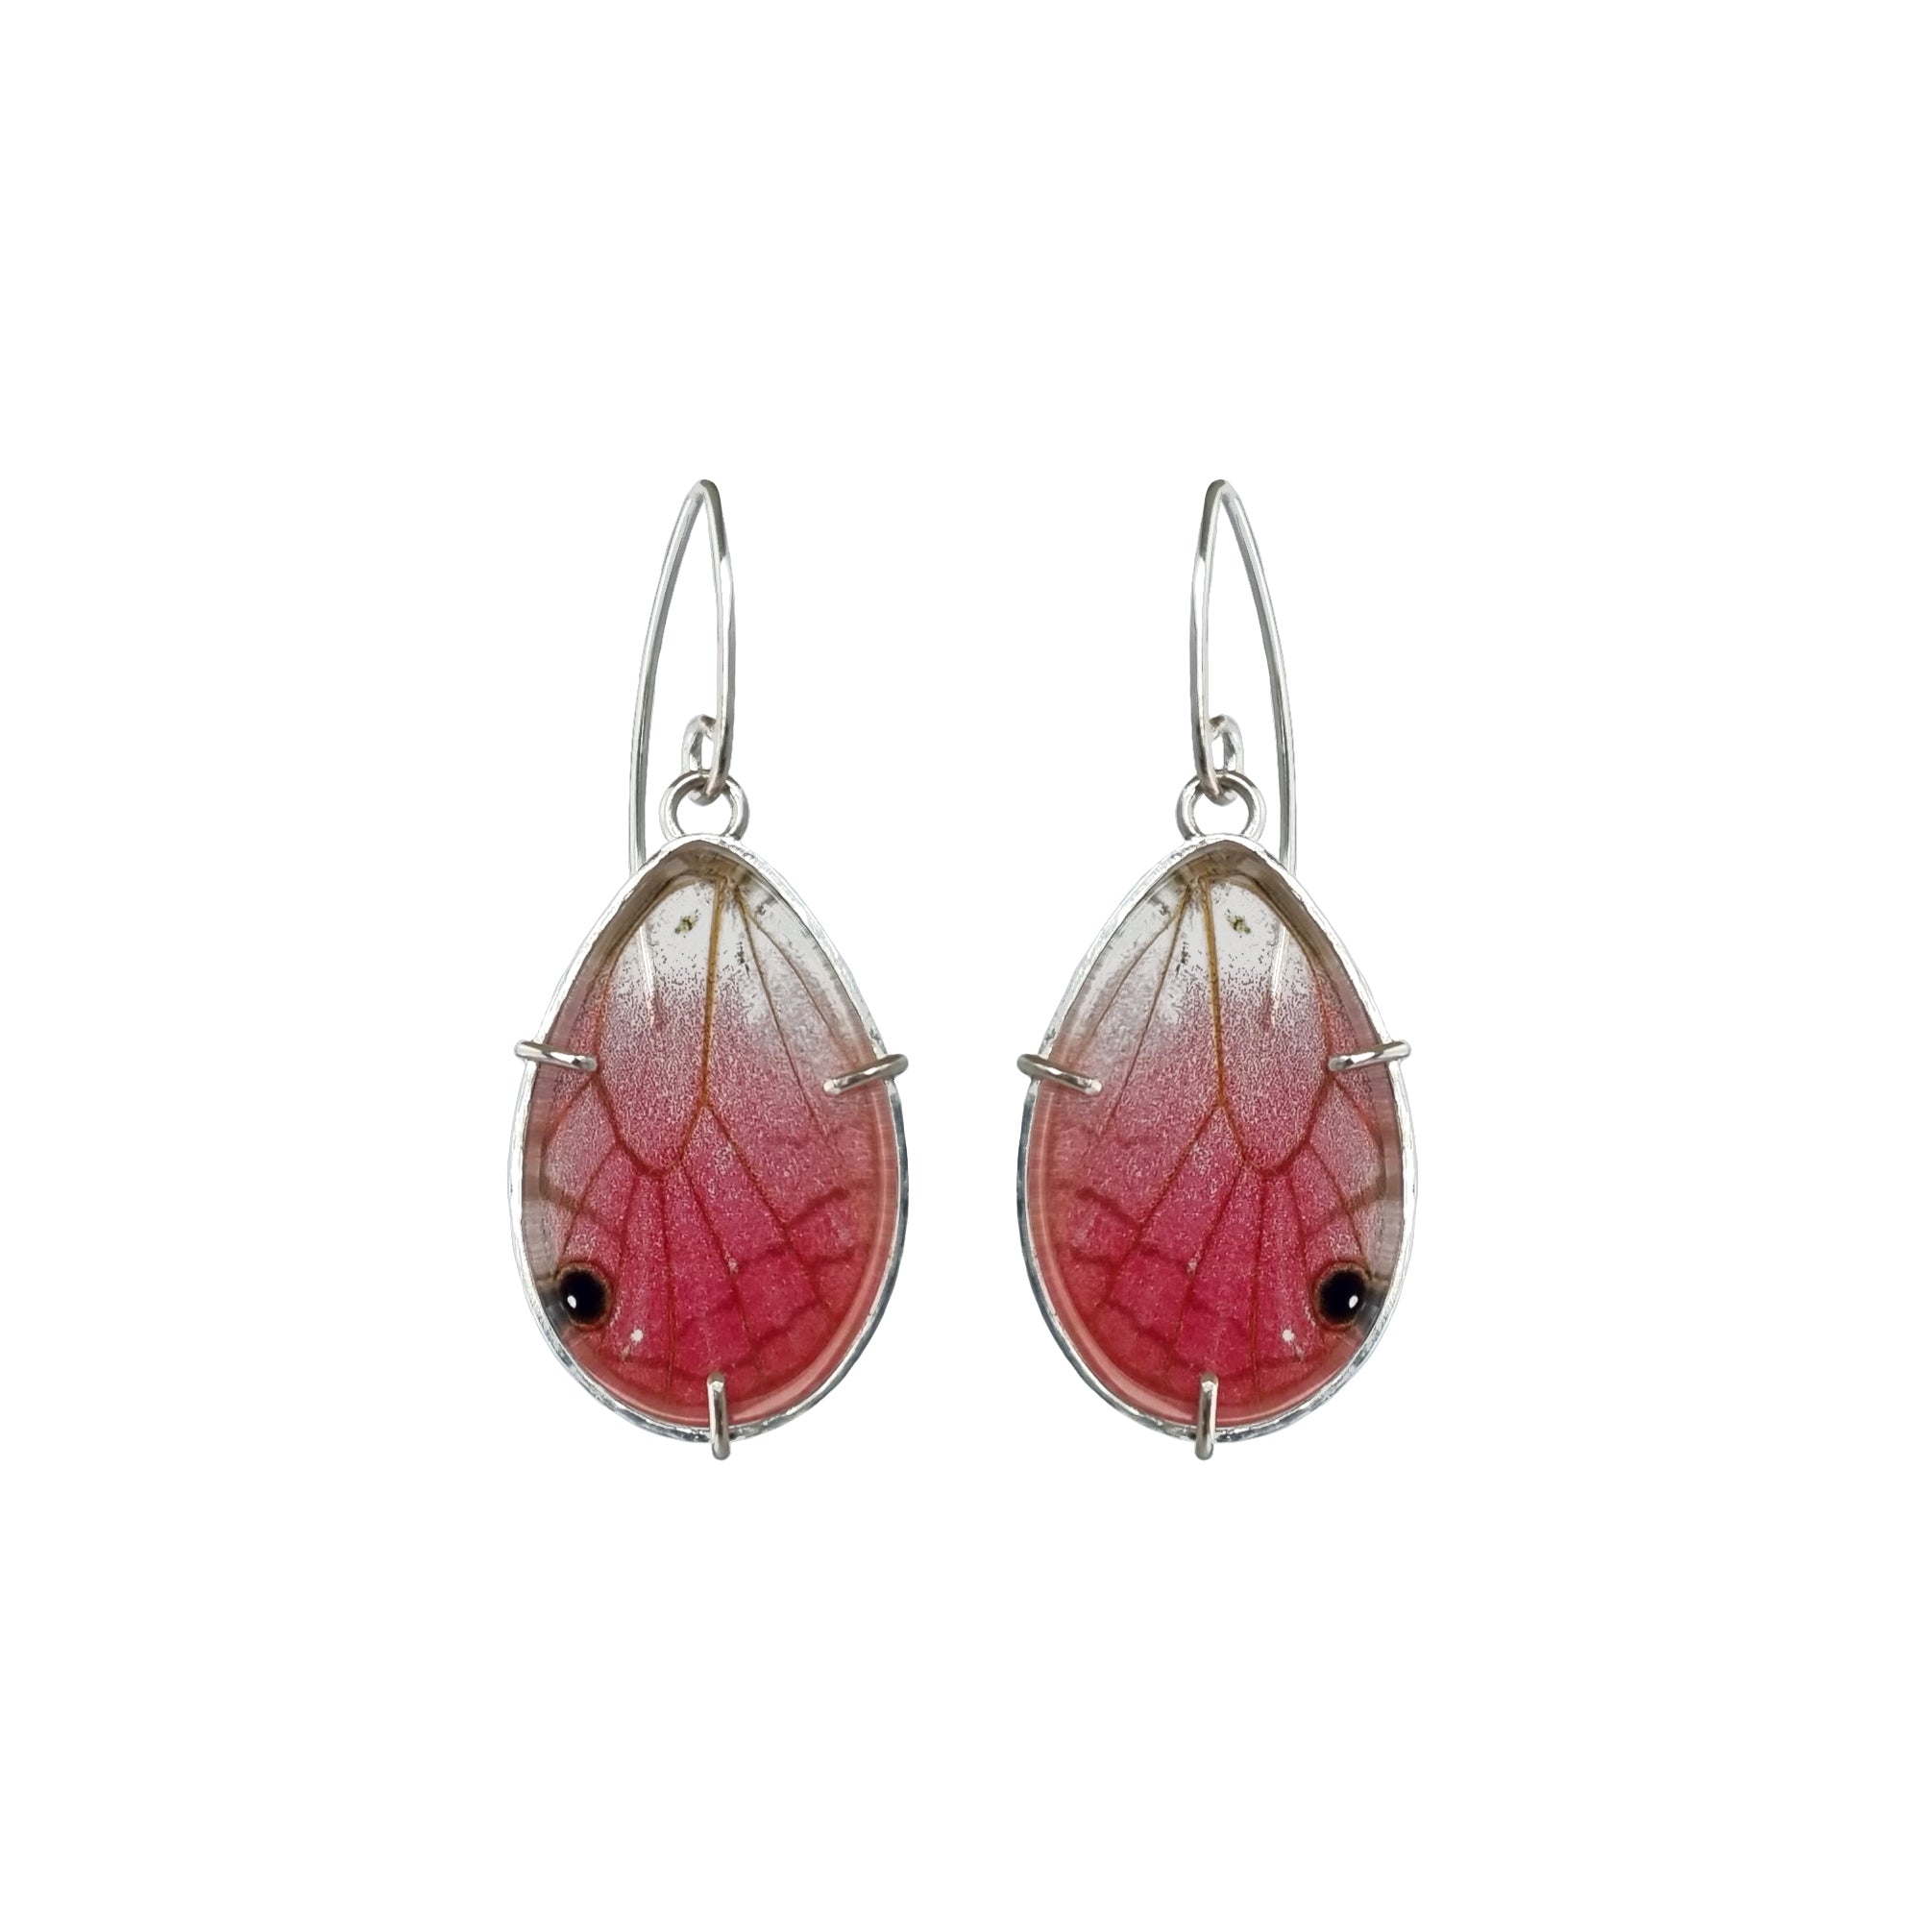 A pair of real Cithaerias aurorina butterfly wings set in solid sterling silver and perspex as vibrant earrings. The earrings are photographed on a studio white background.